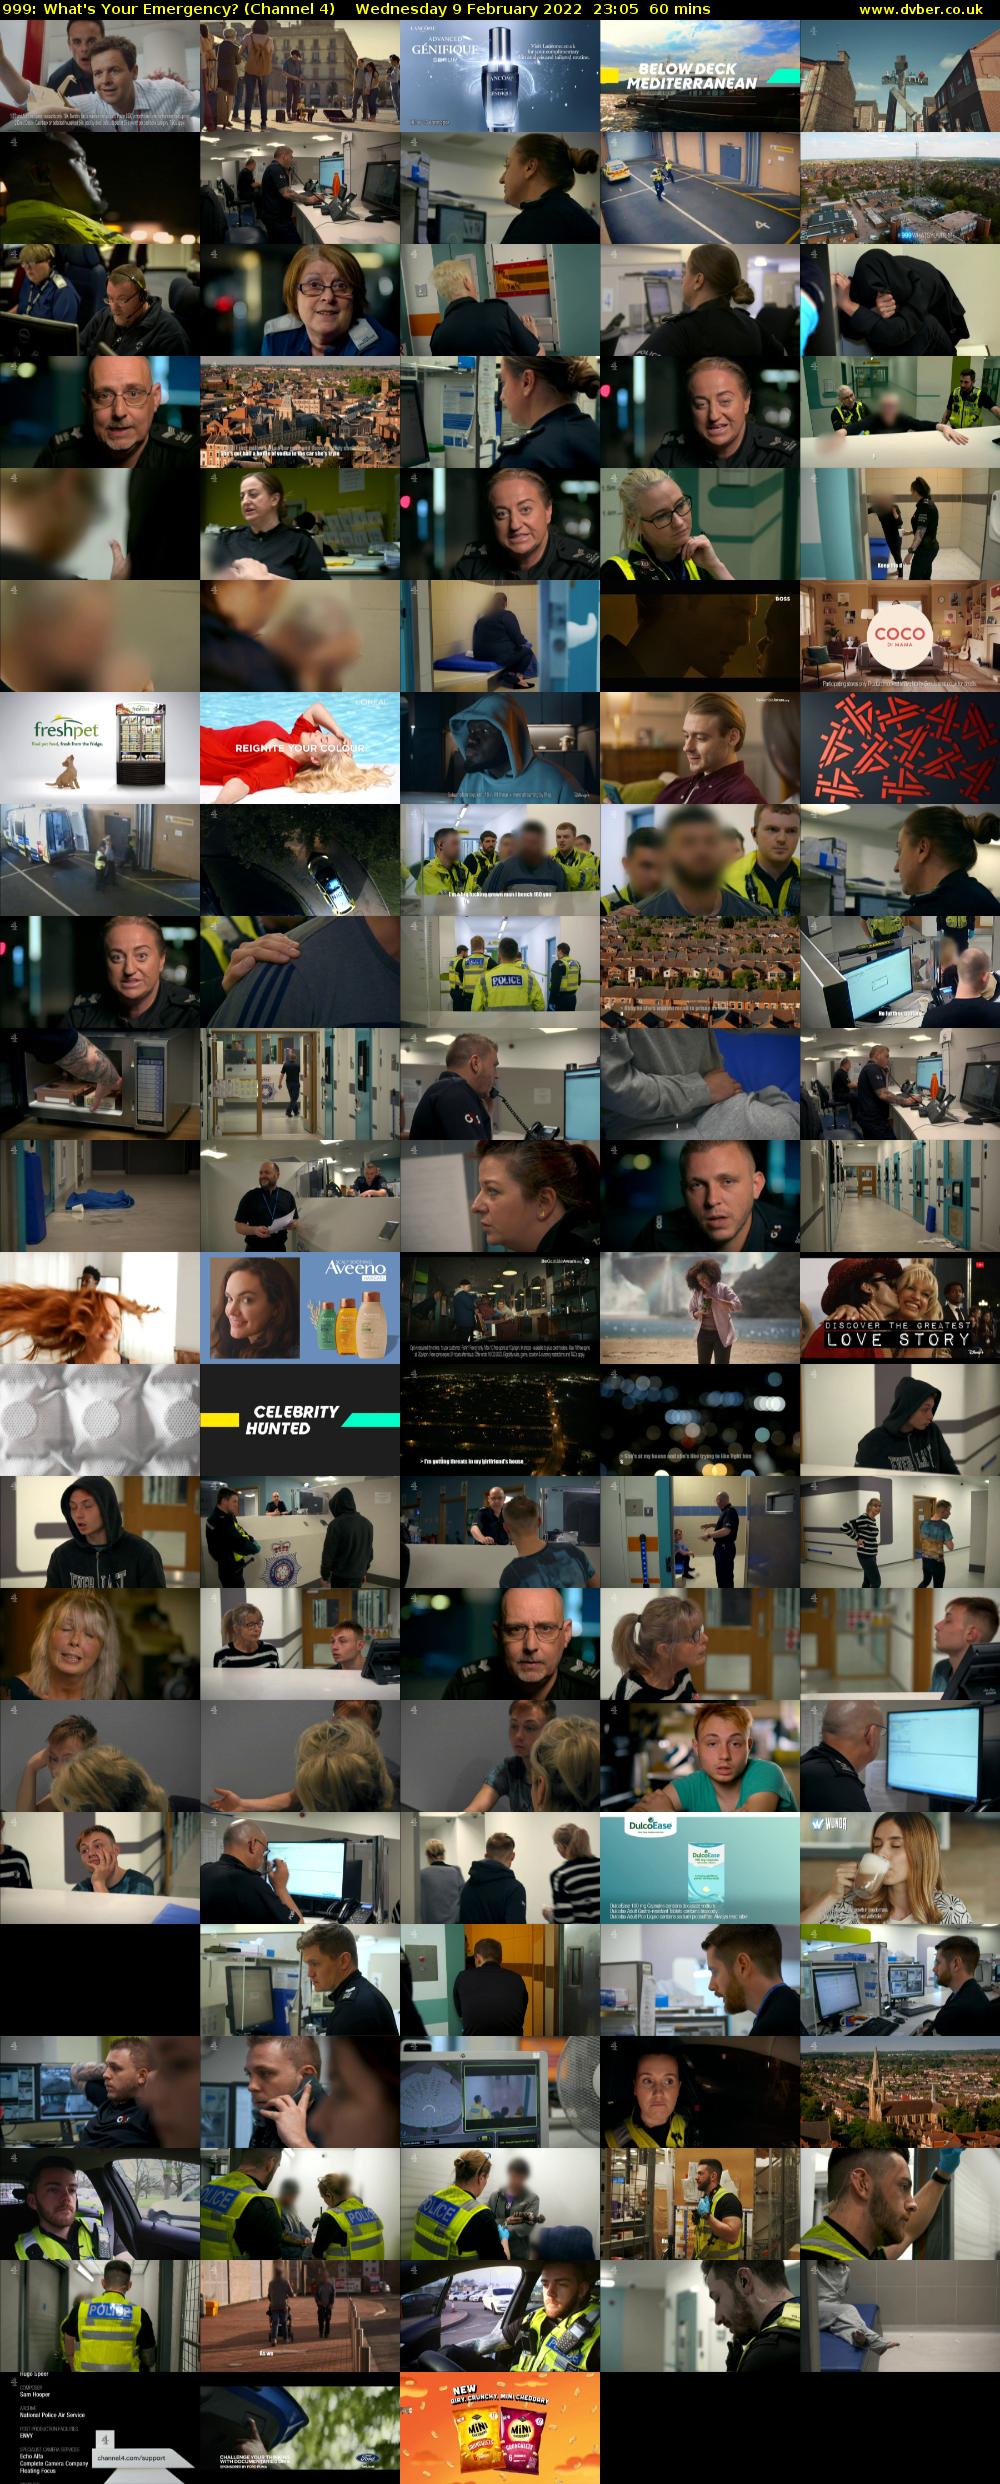 999: What's Your Emergency? (Channel 4) Wednesday 9 February 2022 23:05 - 00:05